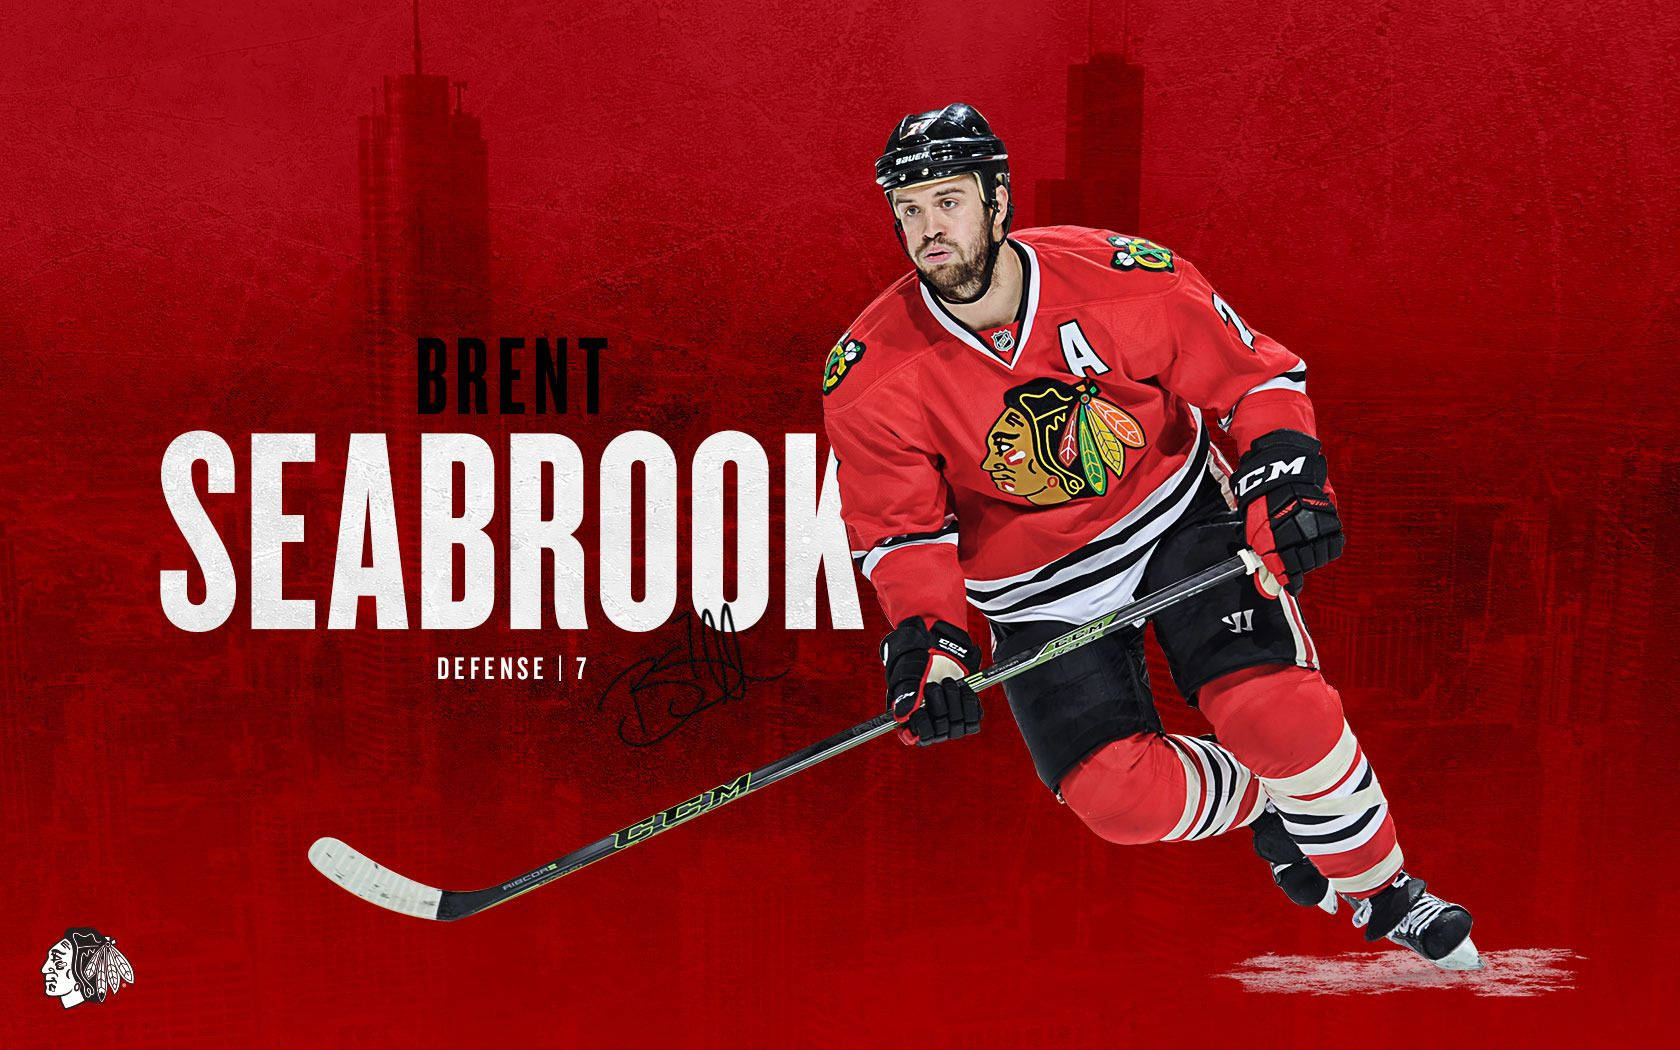 Brent Seabrook in action on ice for Chicago Blackhawks Wallpaper